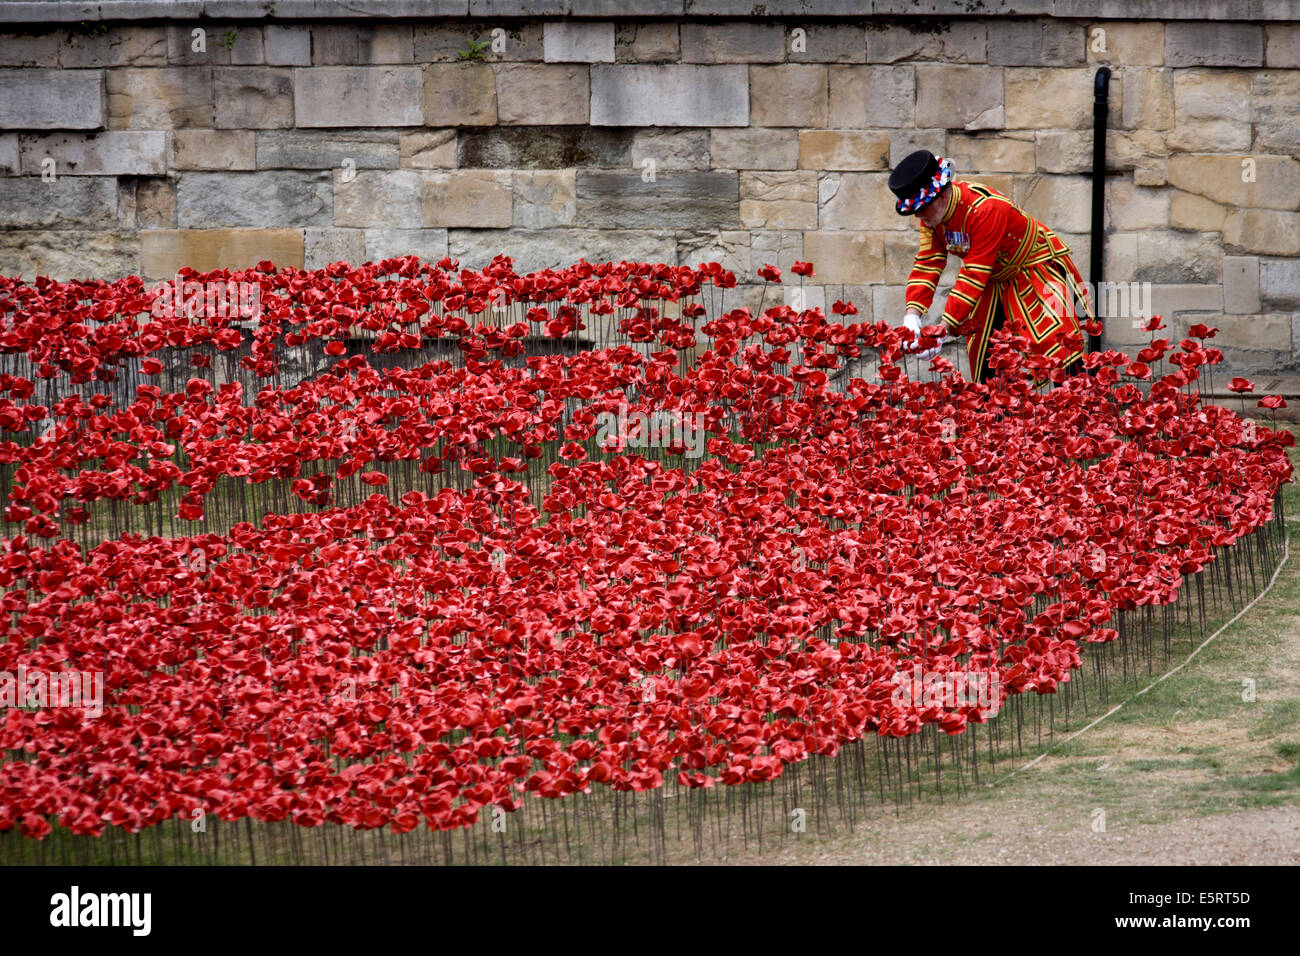 London, UK 5th August 2014: Marking the centenary of the beginning of the First World War (WW1) in 1914, a Tower of London Beefeater adjusts among some of the 888,246 ceramic poppies - one for each British military death - created by artist Paul Cummins. Remaining in place until the date of the armistice on November 11th. Across the world, remembrance ceremonies for this historic conflict that affected world nations, London saw many such gestures to remember the millions killed in action at the beginning of the 20th century. Credit:  Richard Baker / Alamy Live News. Stock Photo